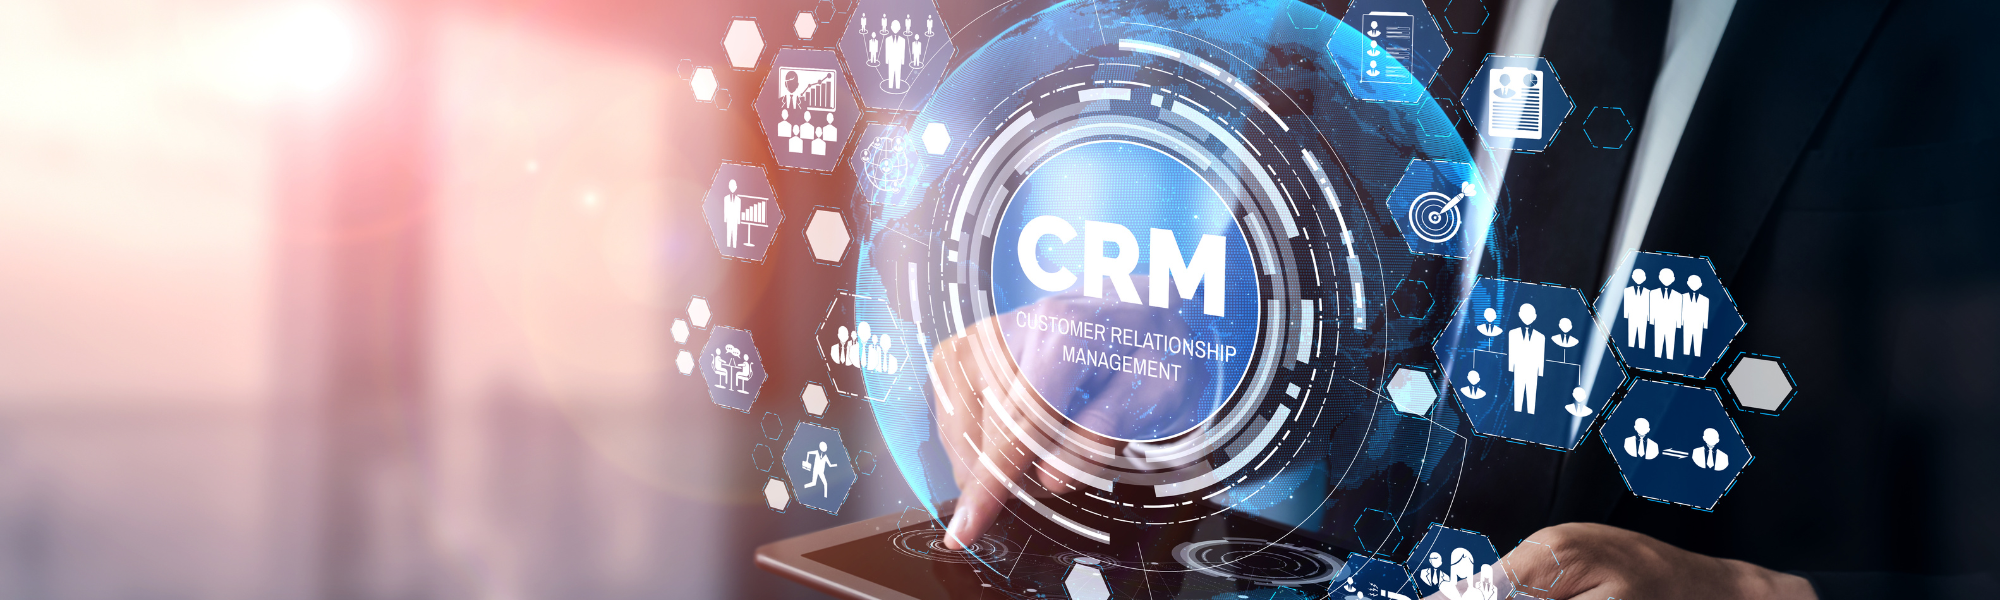 What is CRM marketing